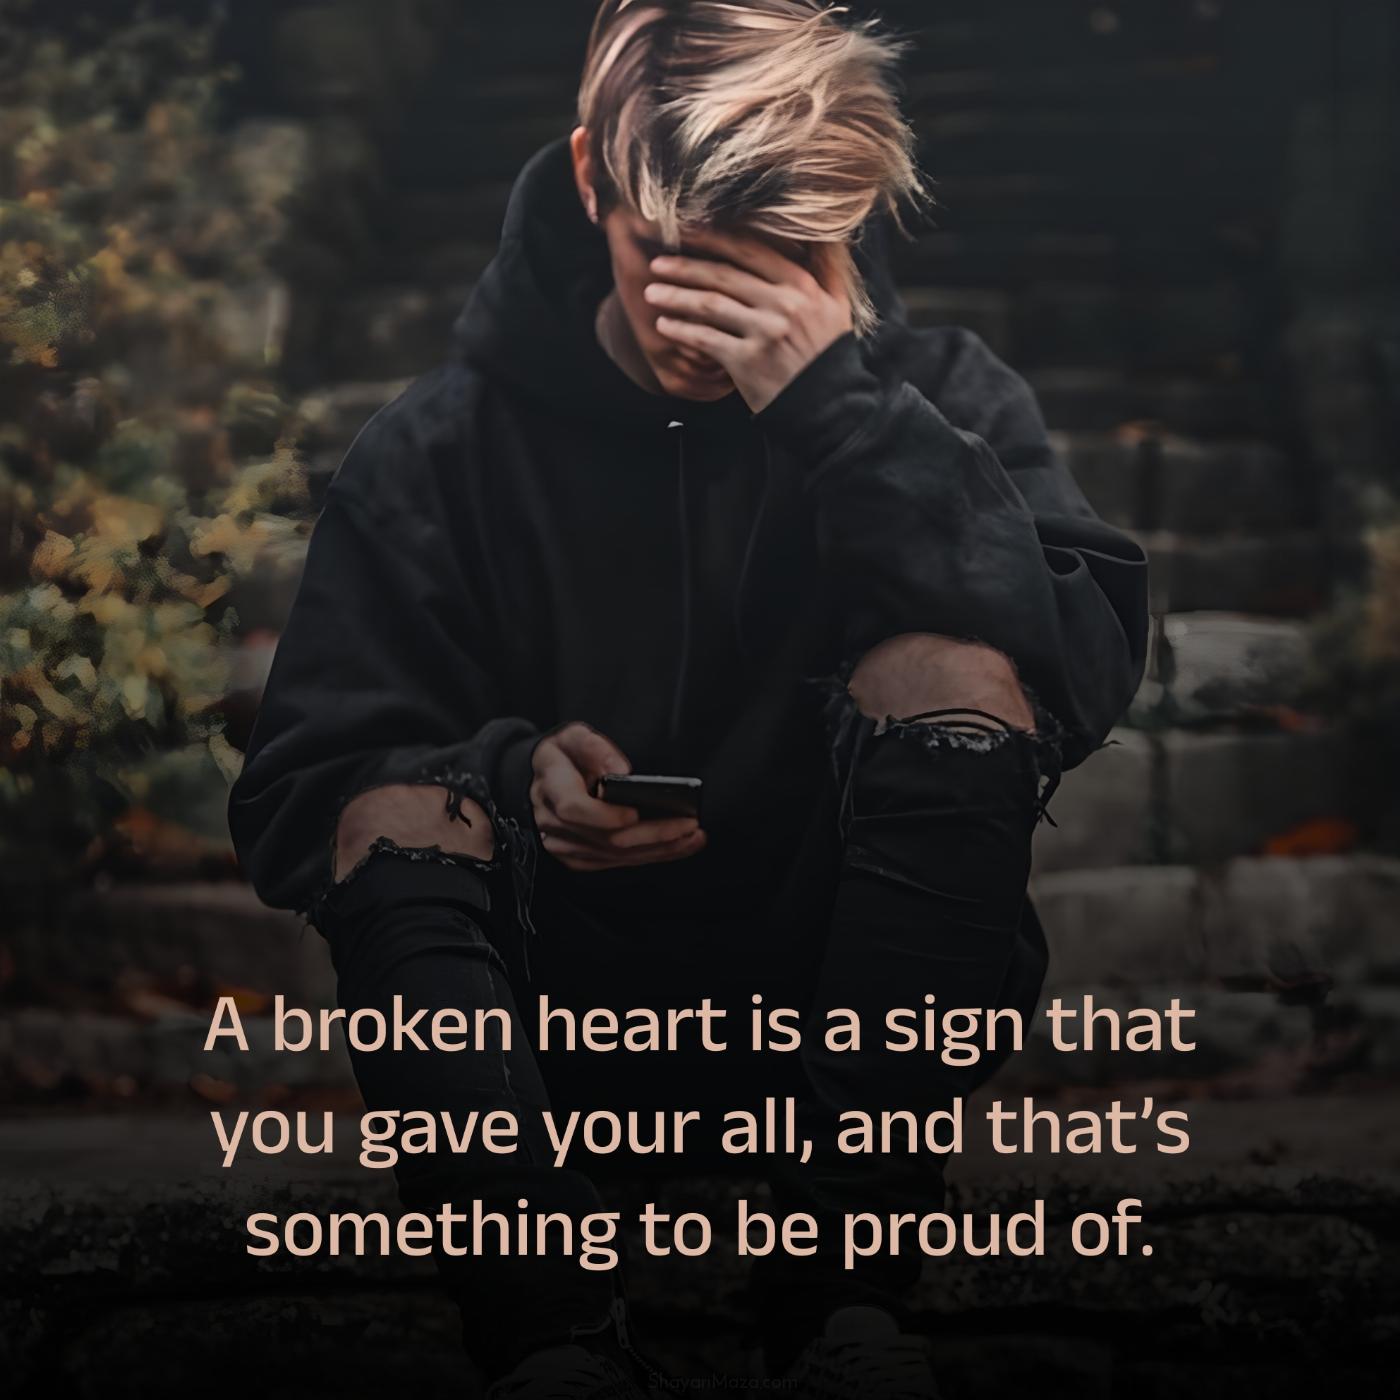 A broken heart is a sign that you gave your all